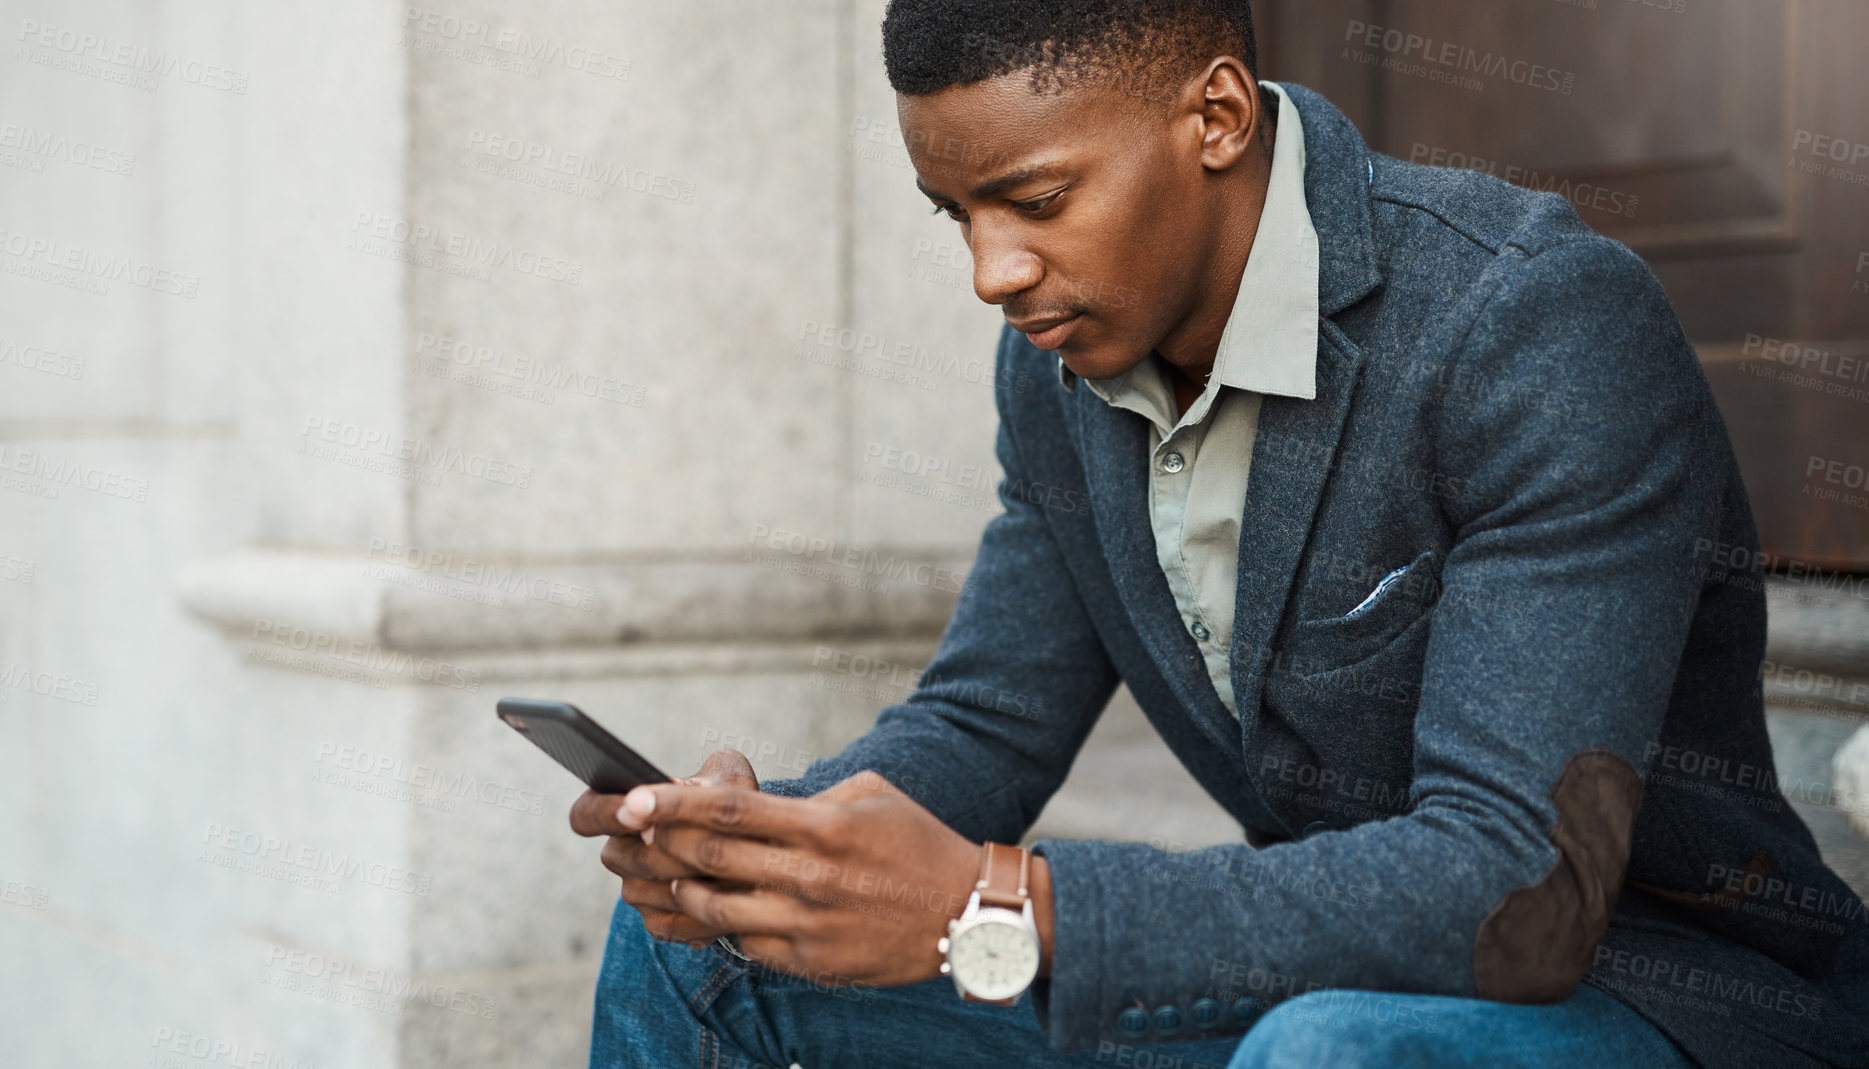 Buy stock photo Shot of a young businessman using a smartphone against an urban background